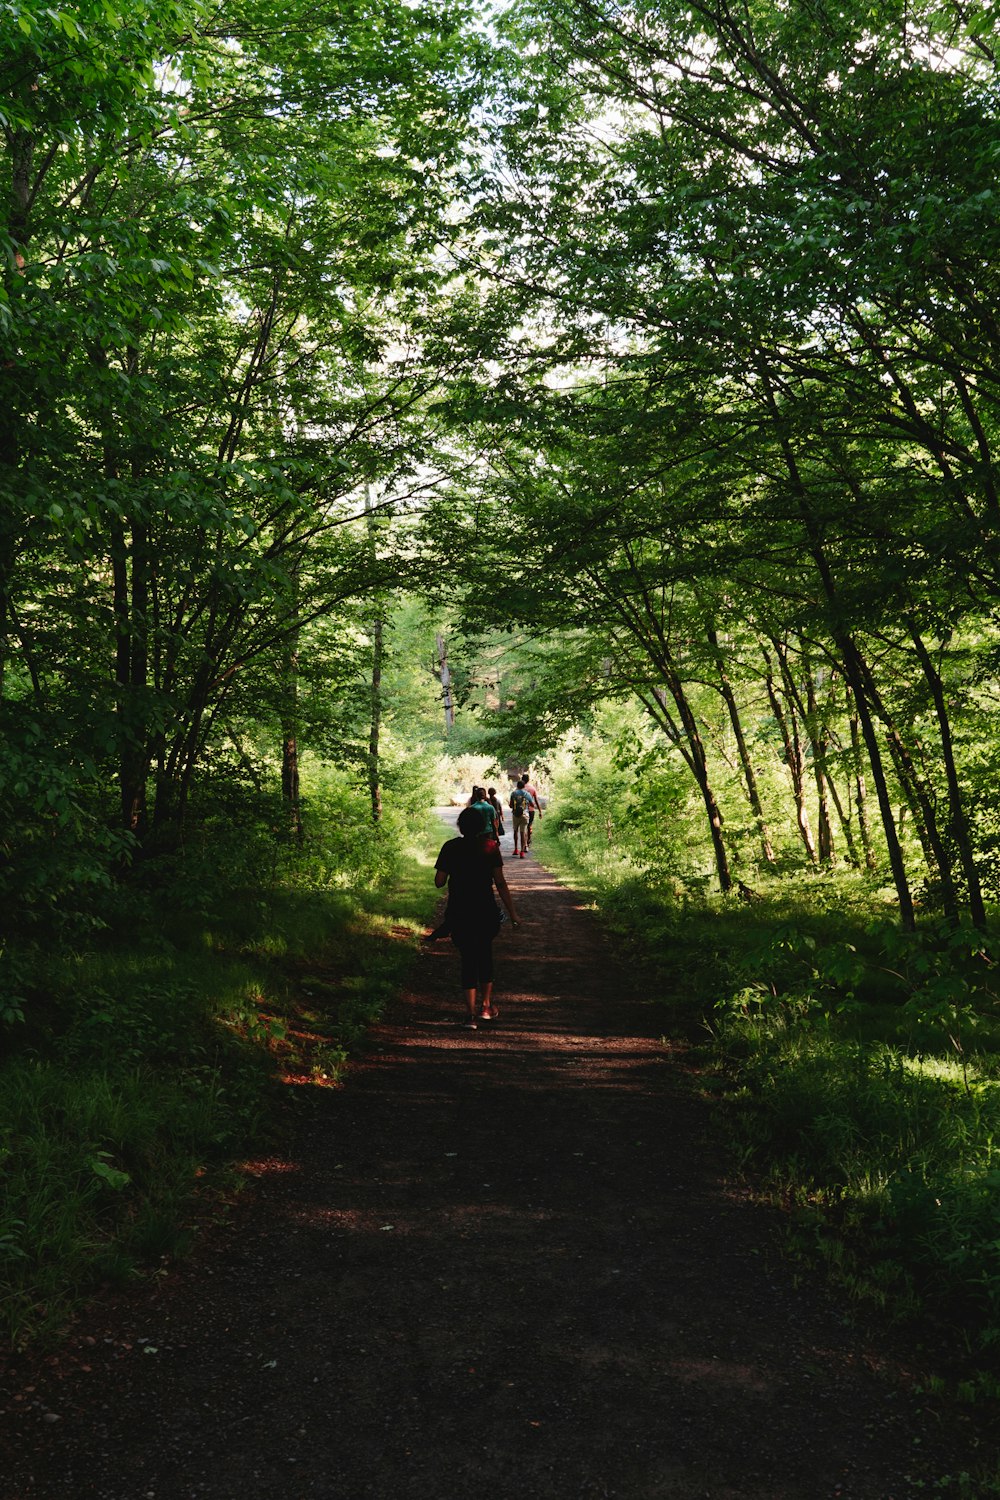 a group of people walking on a path through a forest